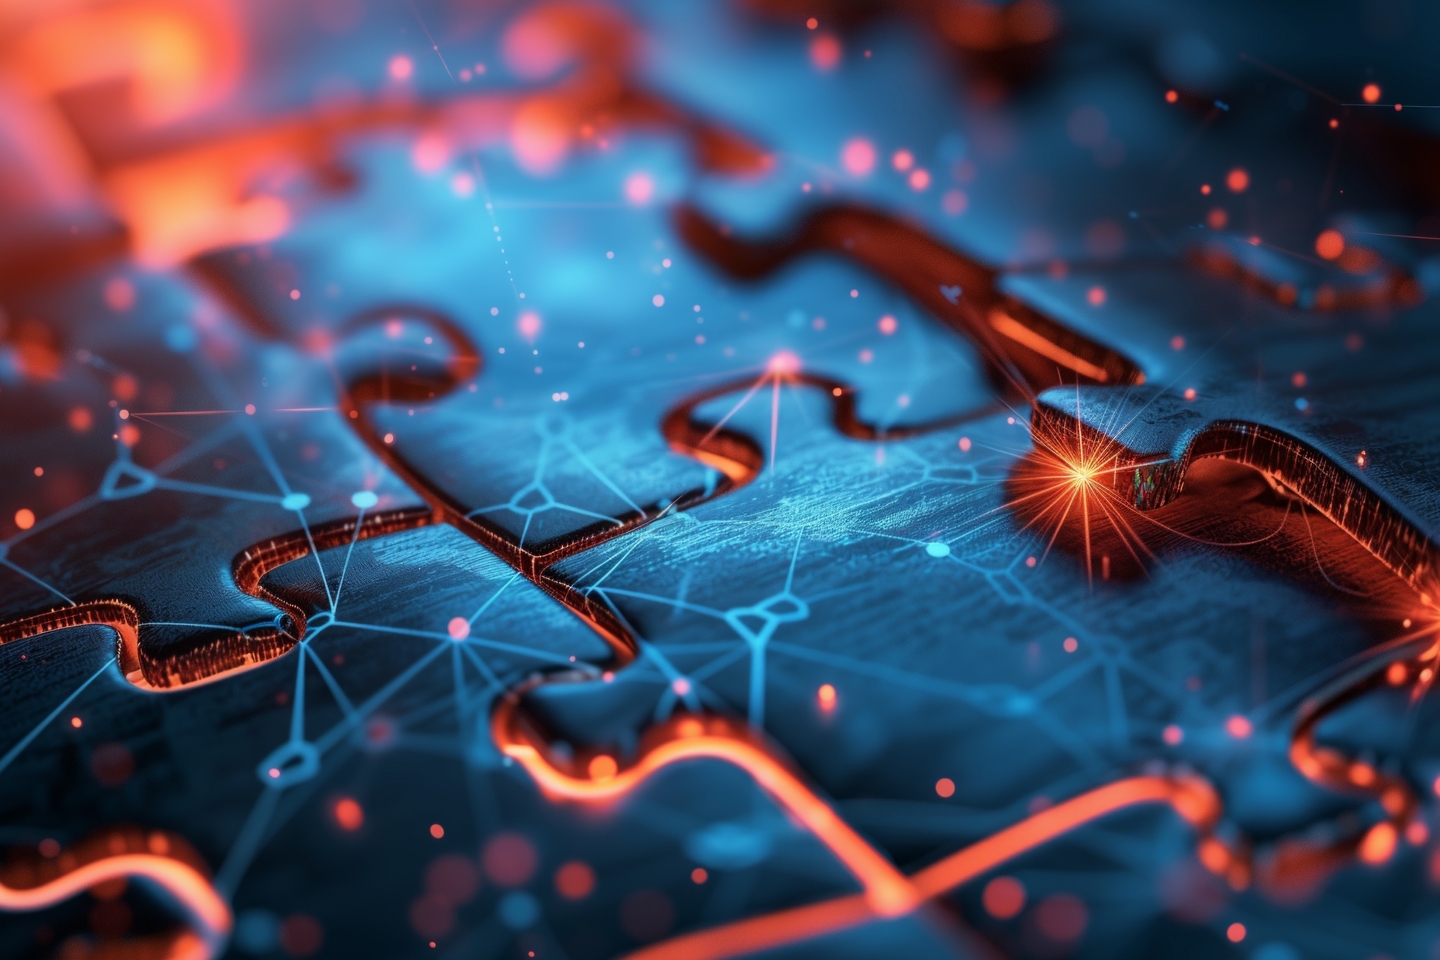 Abstract image of red and blue puzzle pieces with a vibrant network